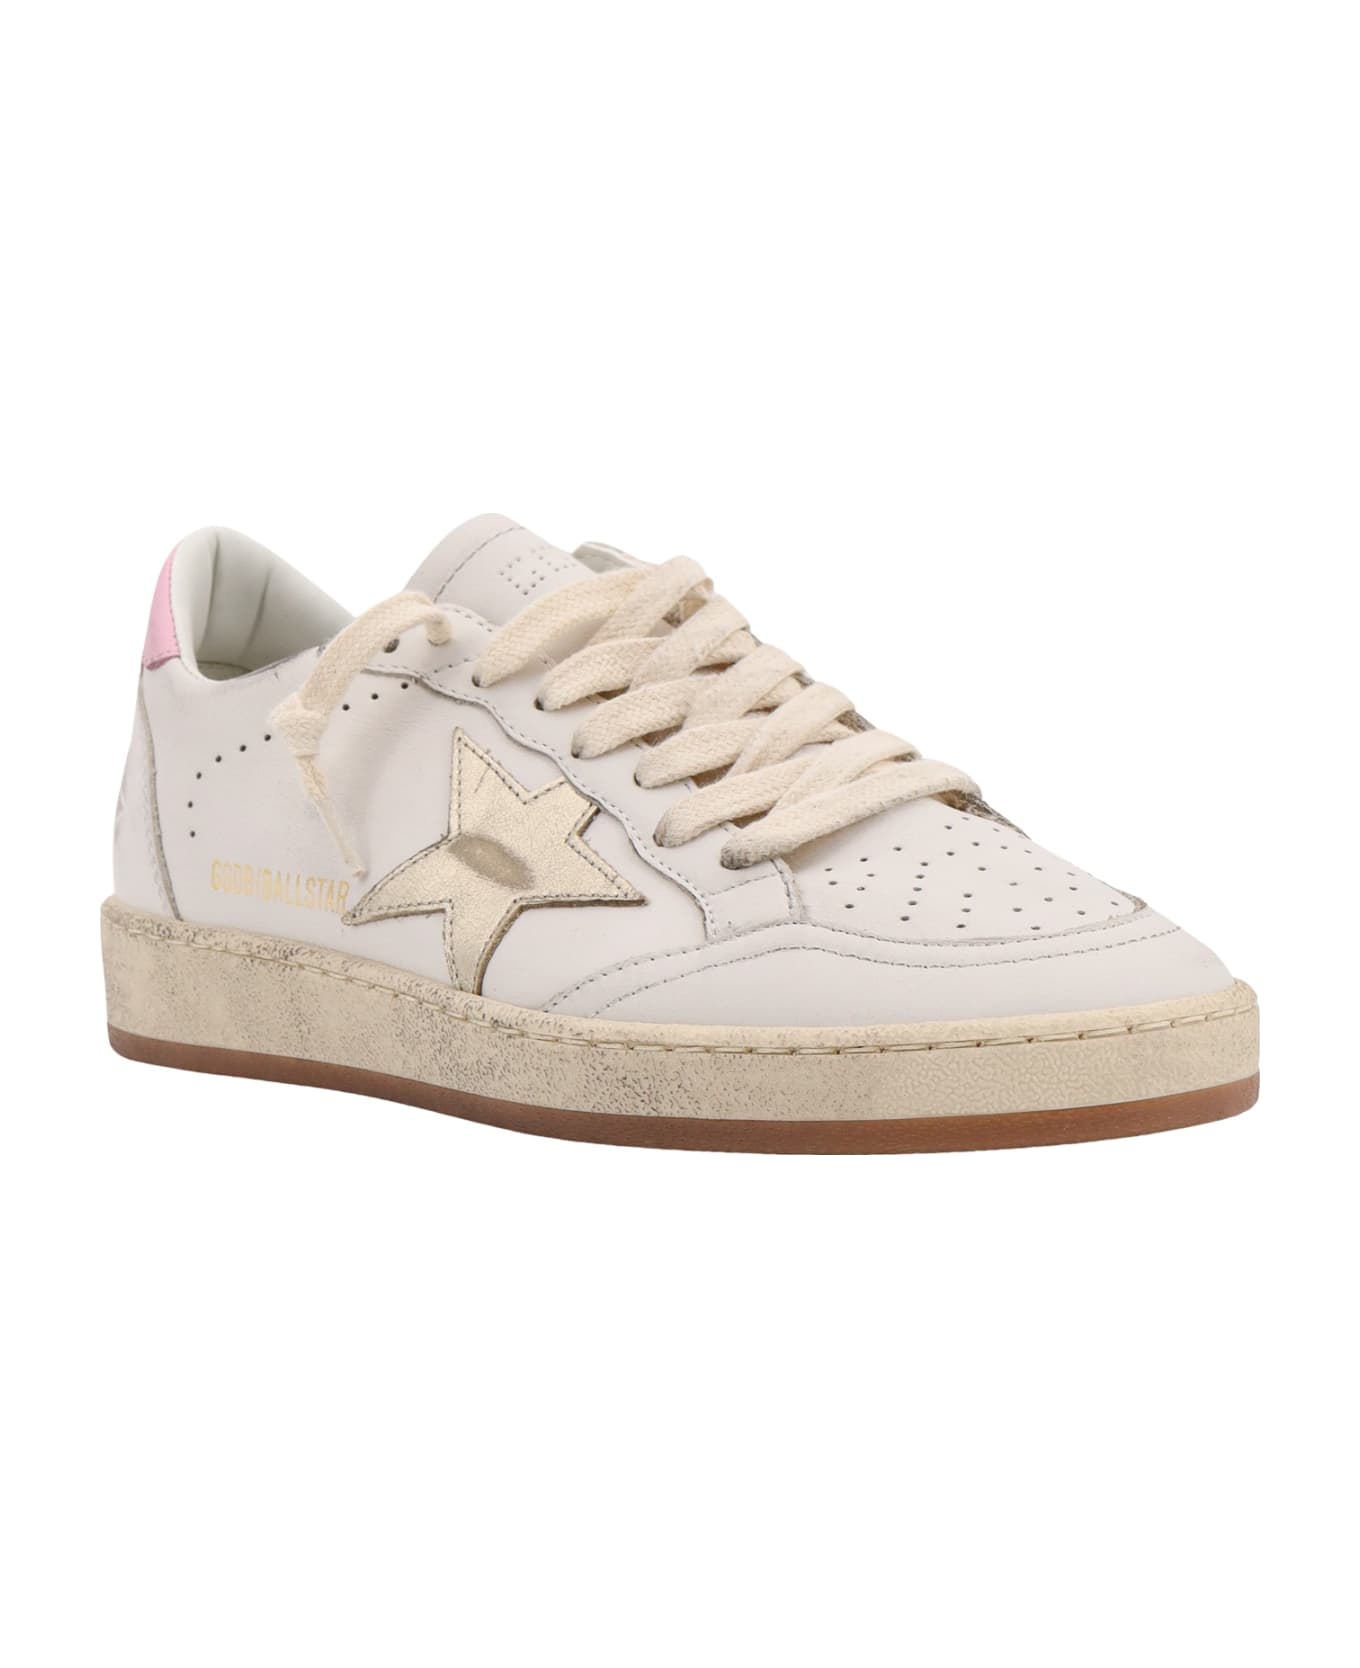 Golden Goose Ball-star Sneakers - White/platinum/orchid pink